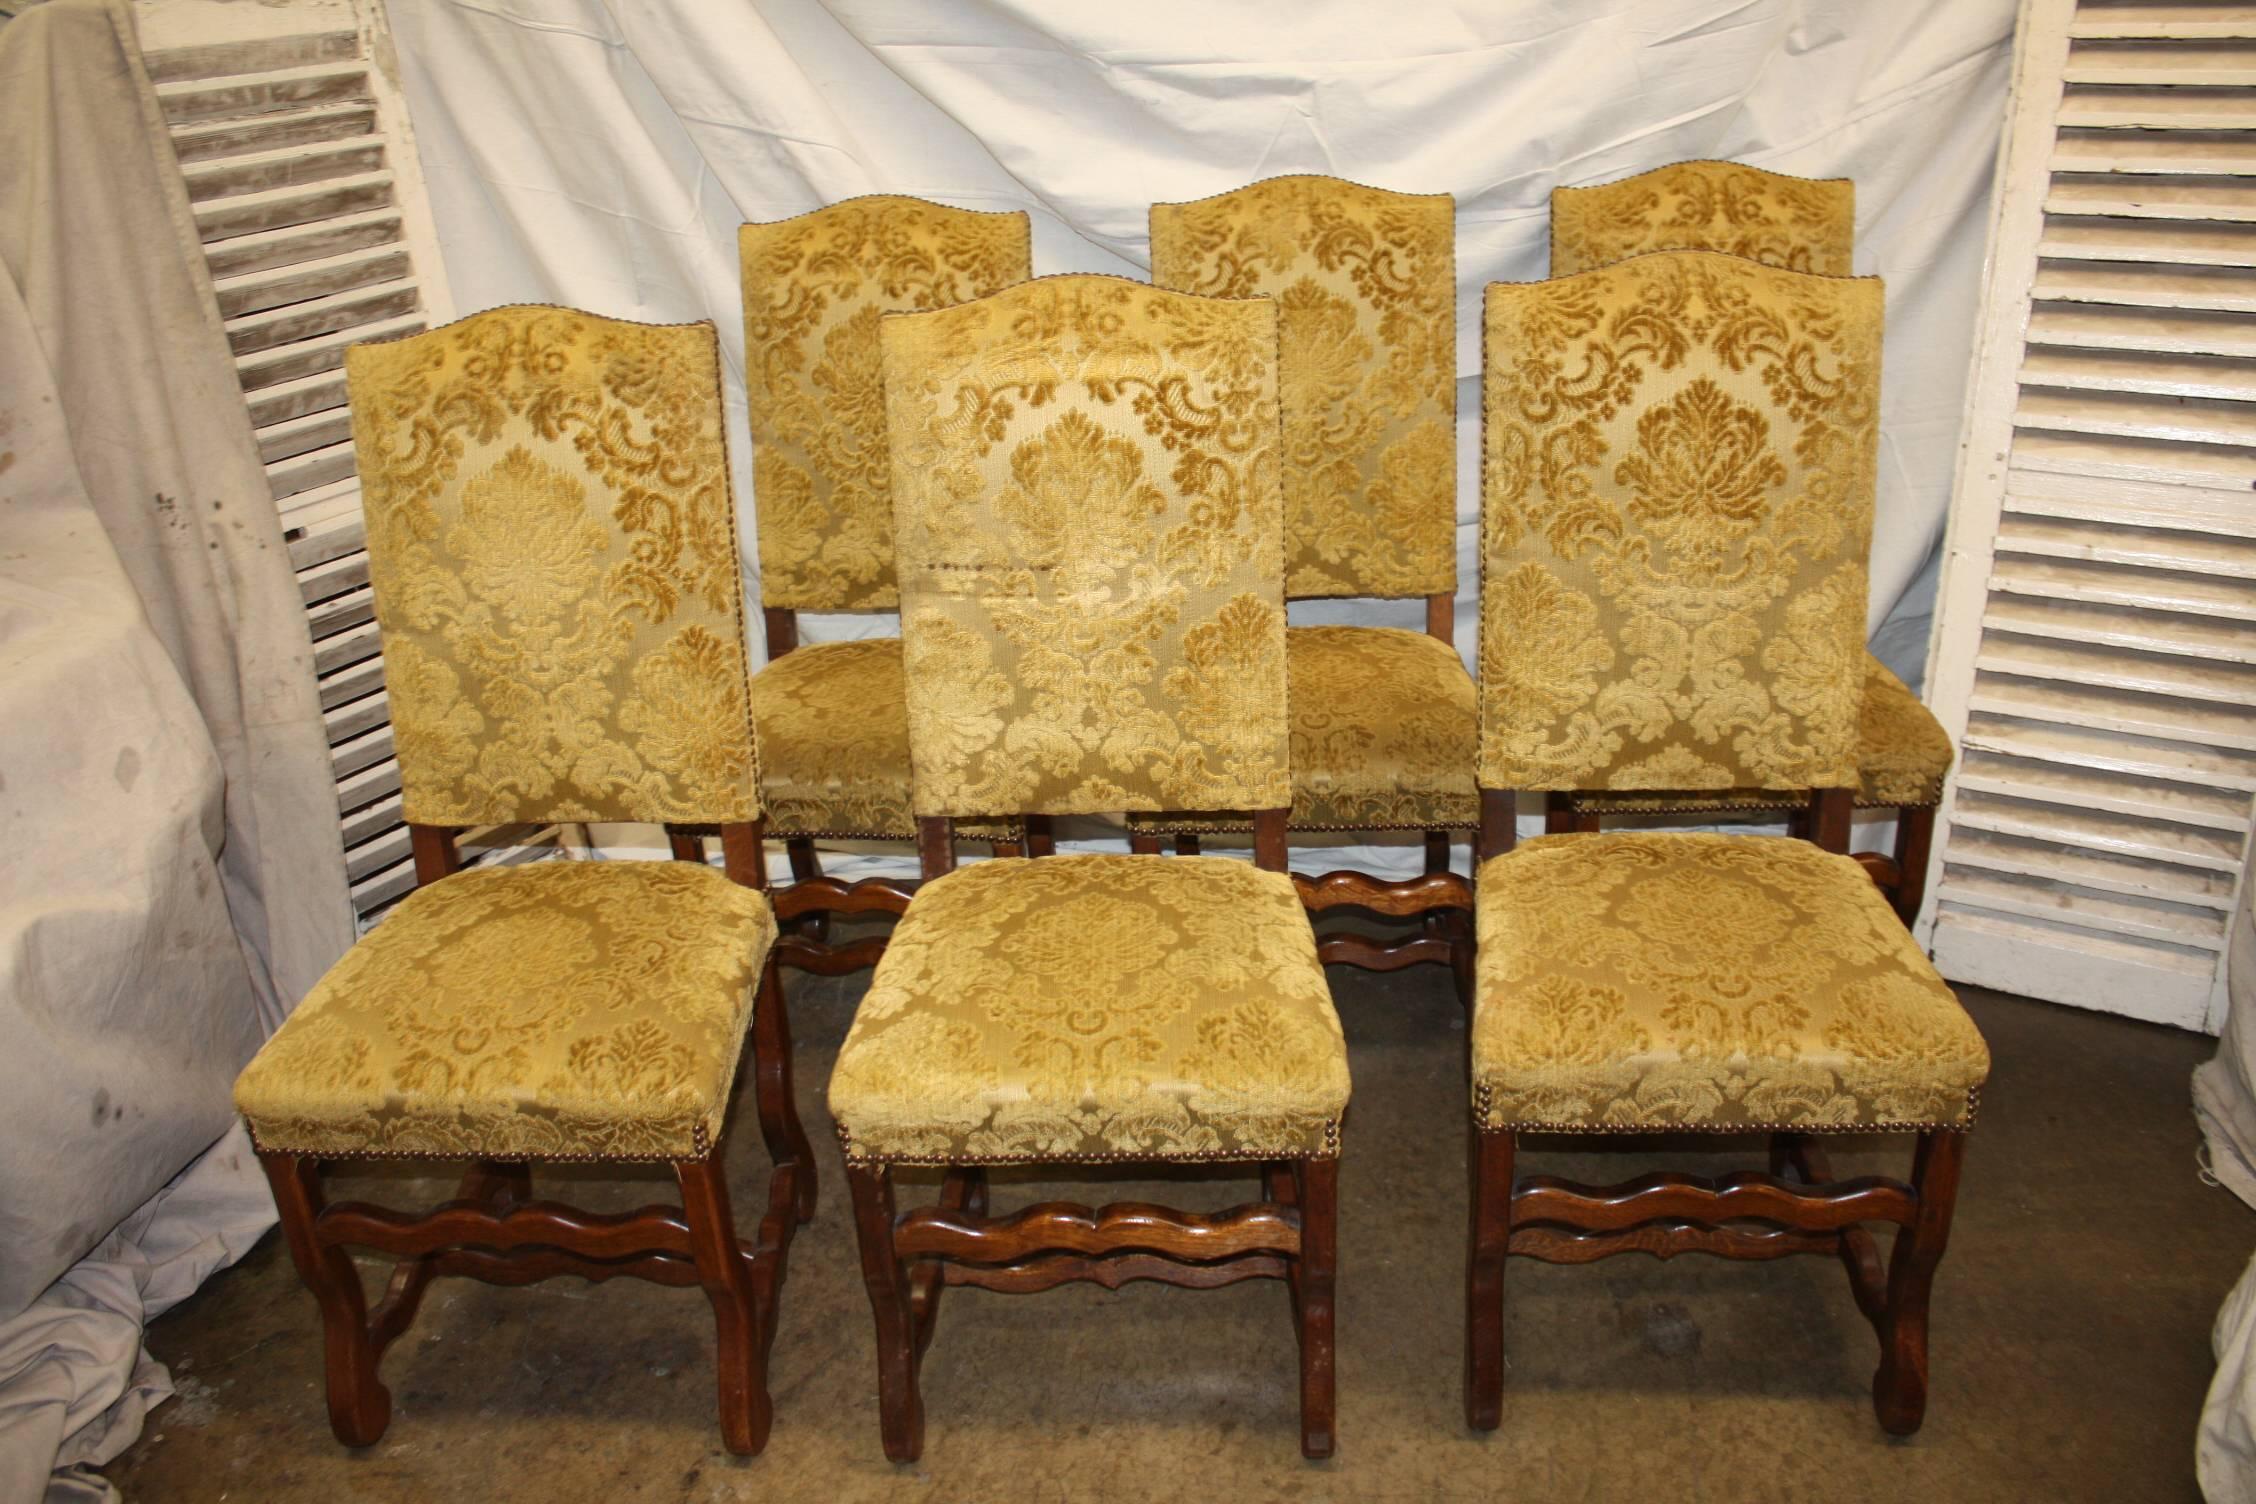 Late 19th century French dining chairs.